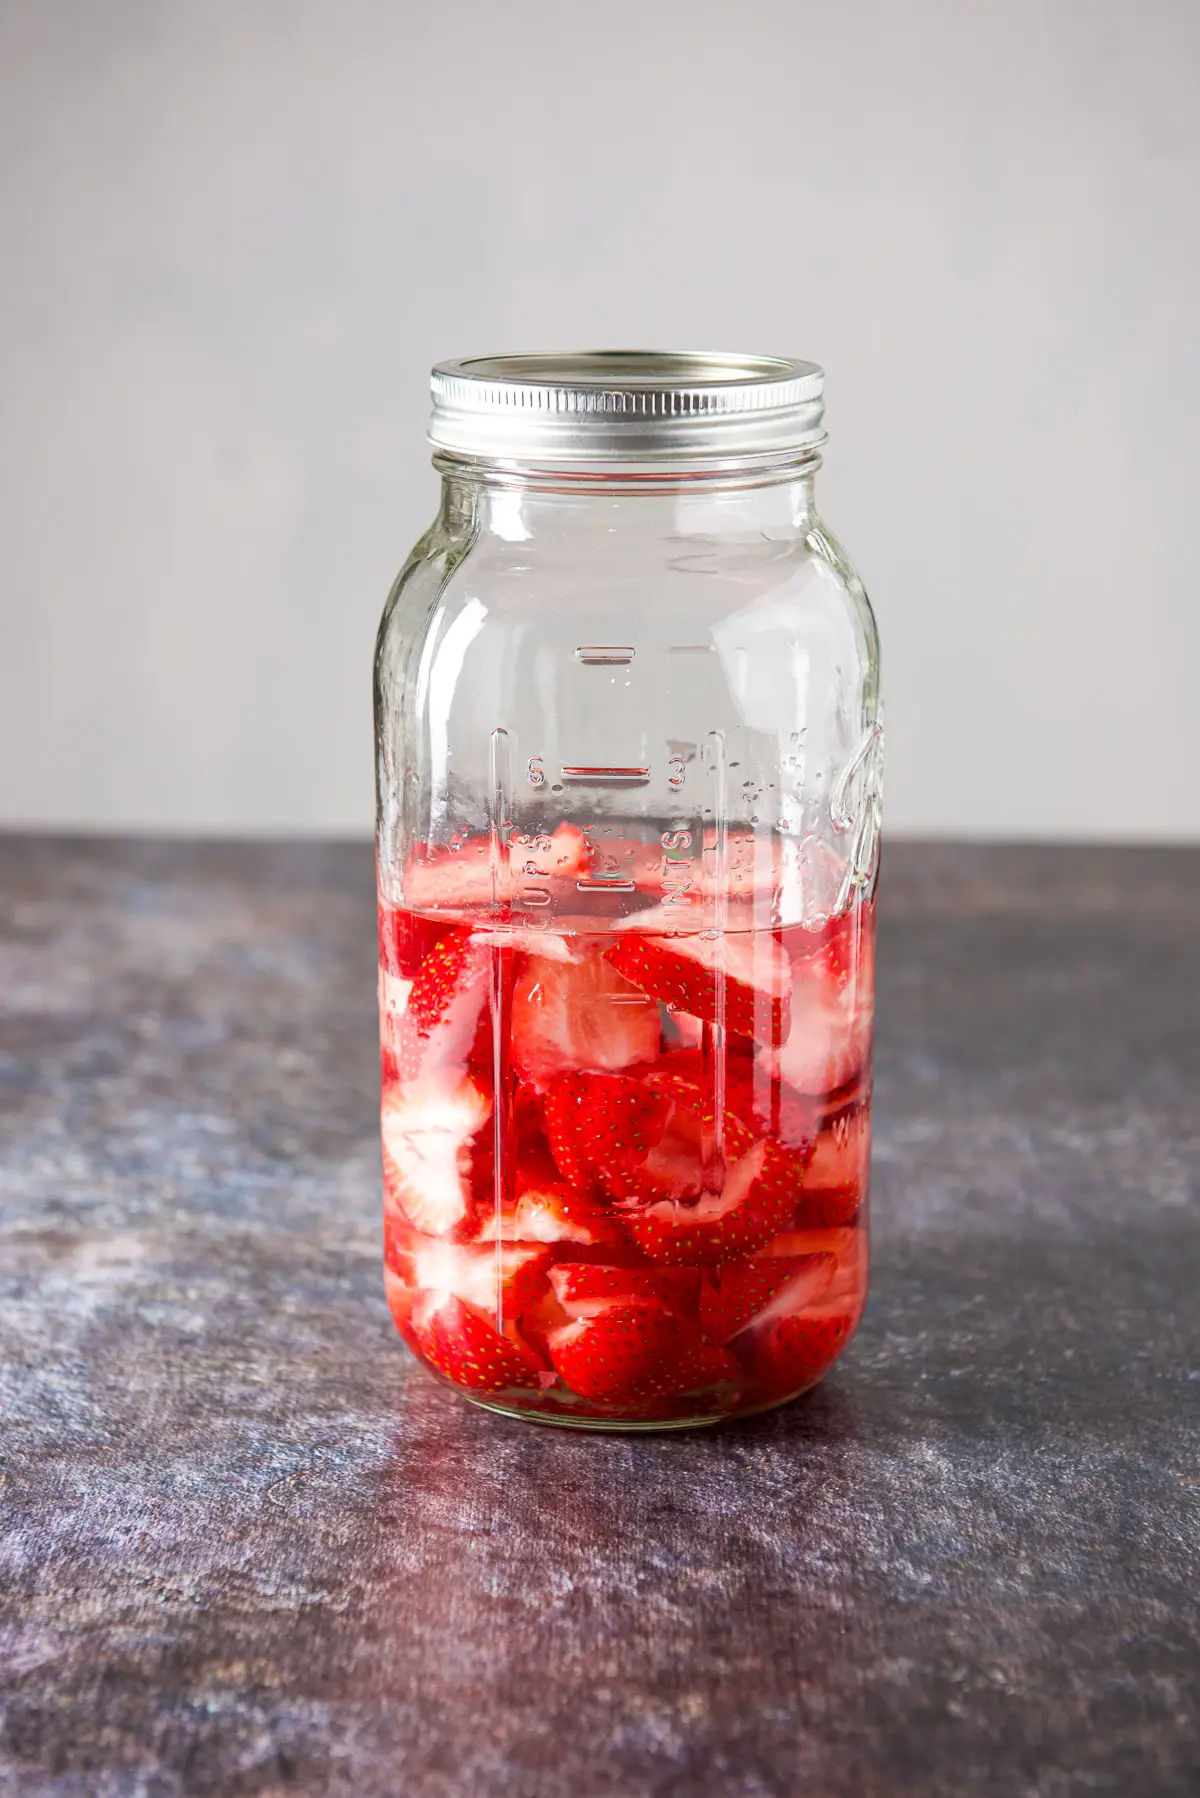 The jar of vodka and strawberries with the lid on and shaken